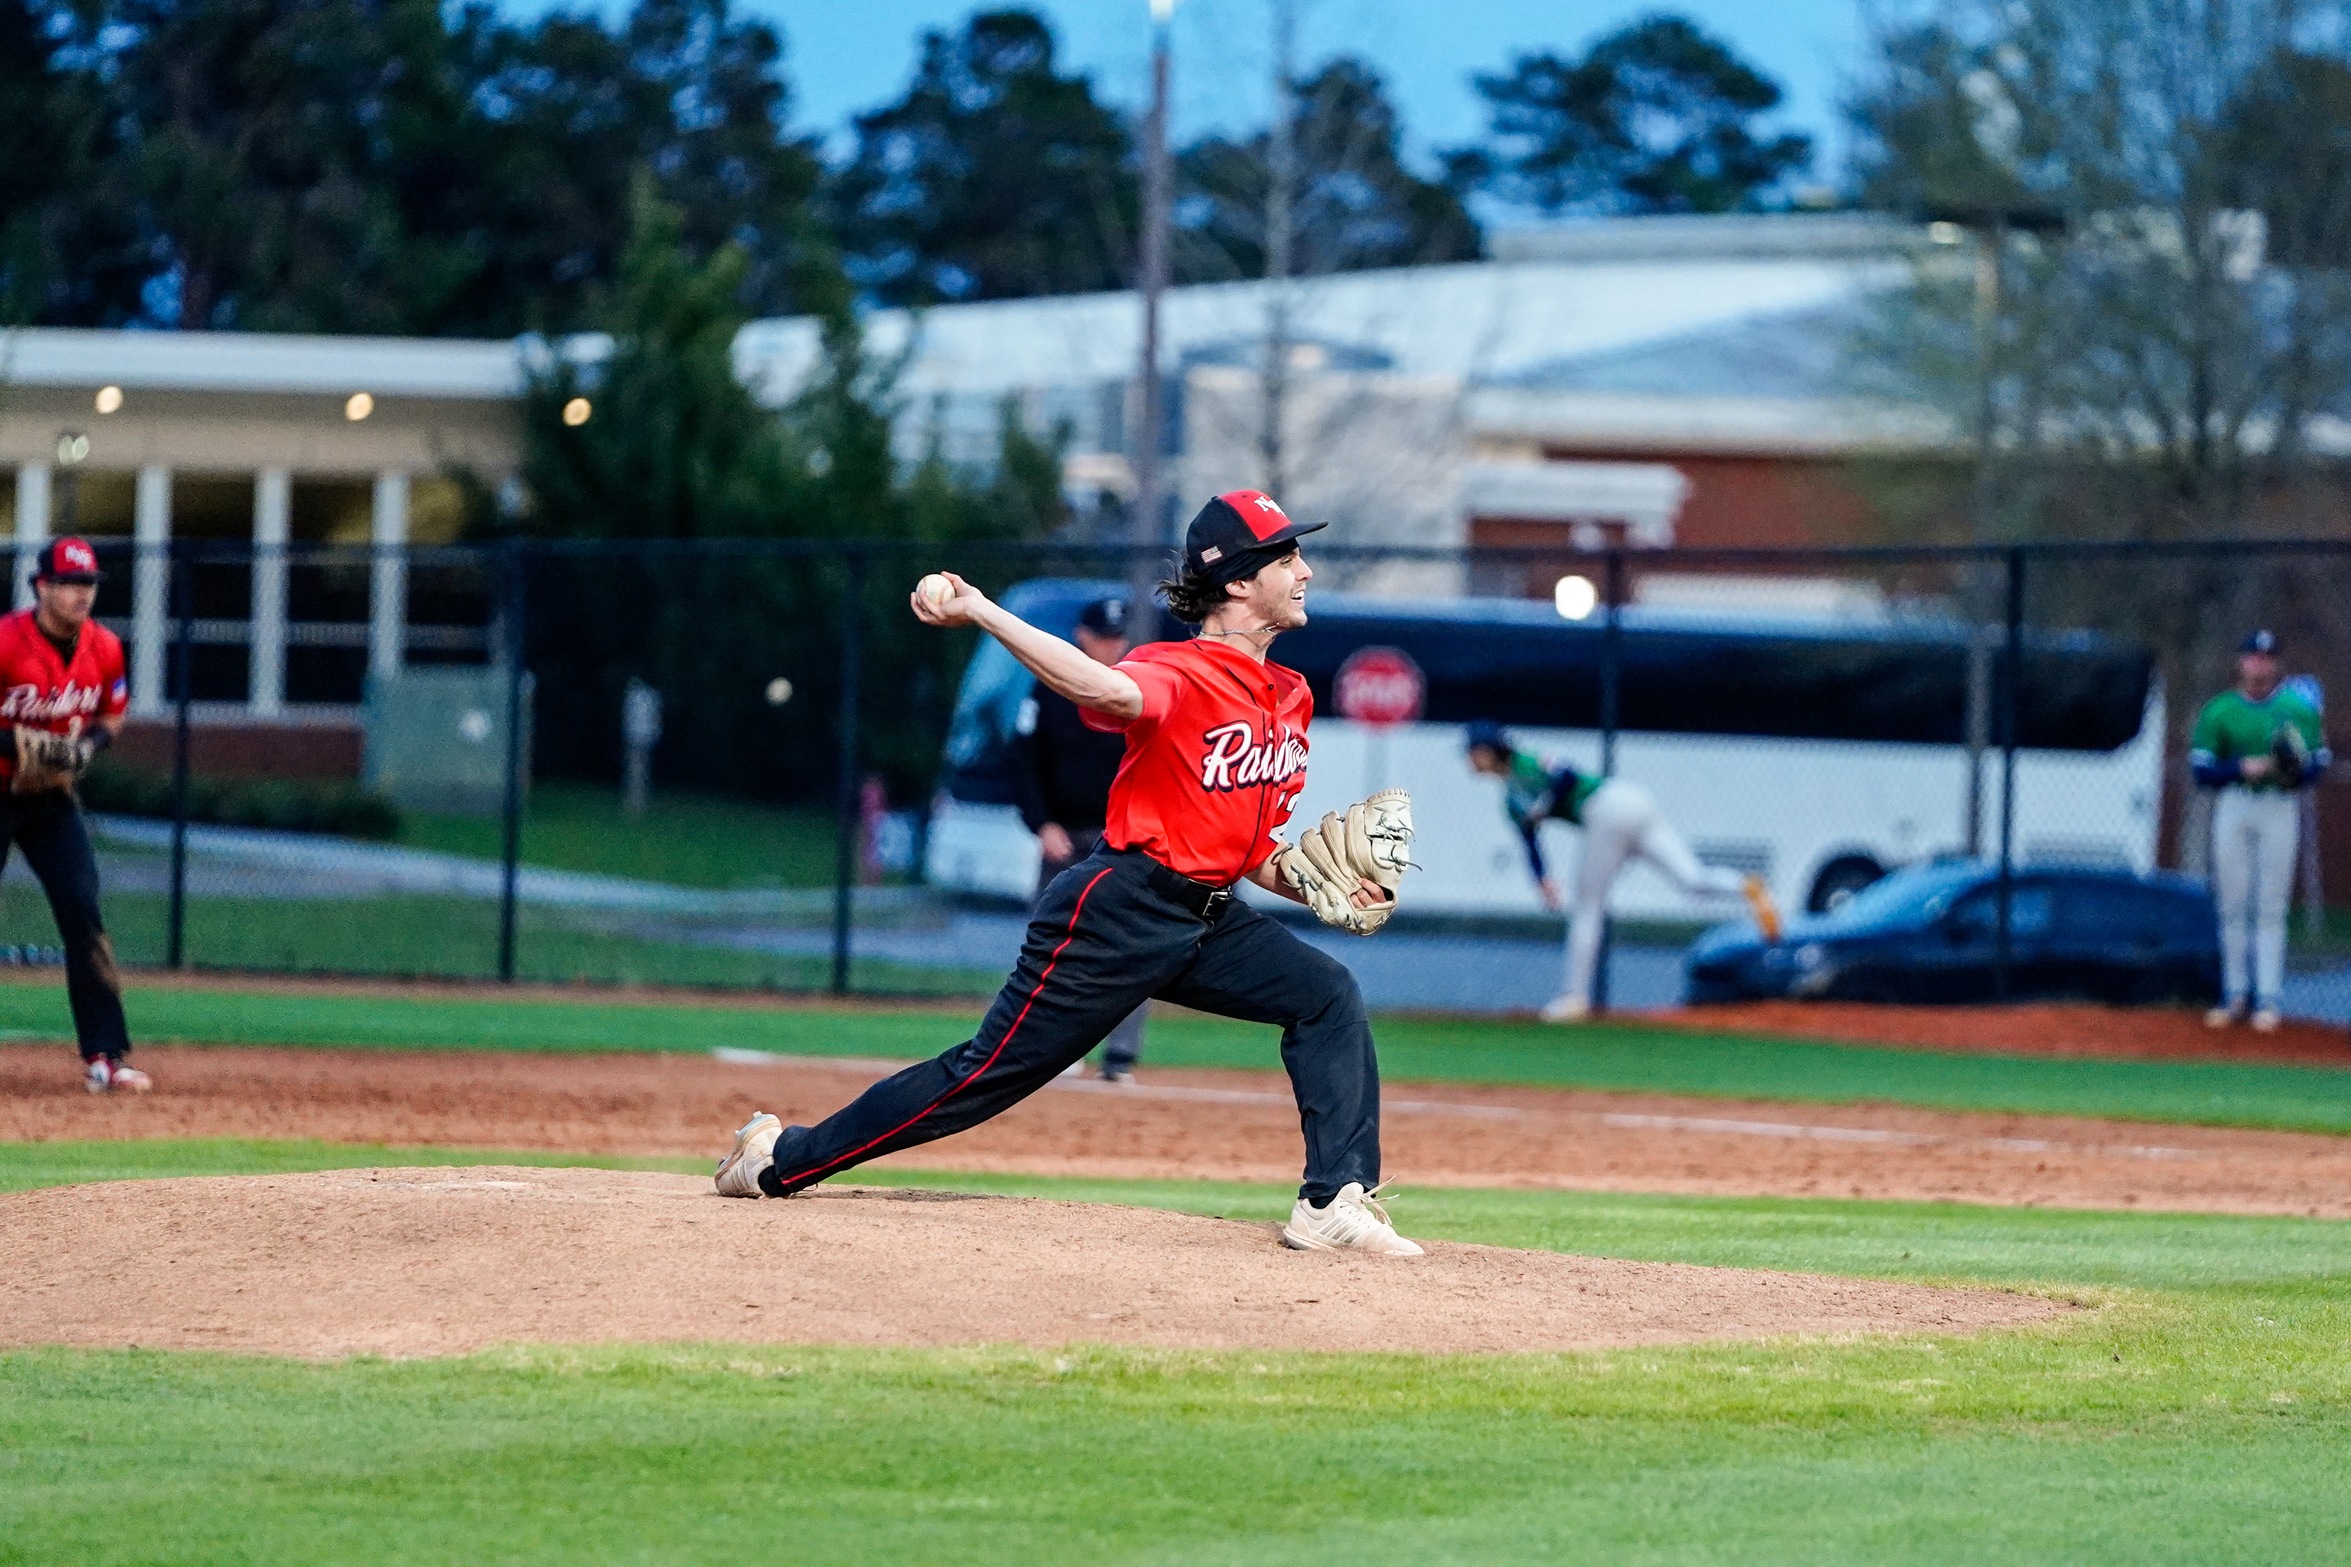 Strek and Offensive Prowess Propel Raiders to 10-1 Victory Against Gulf Coast on Thursday